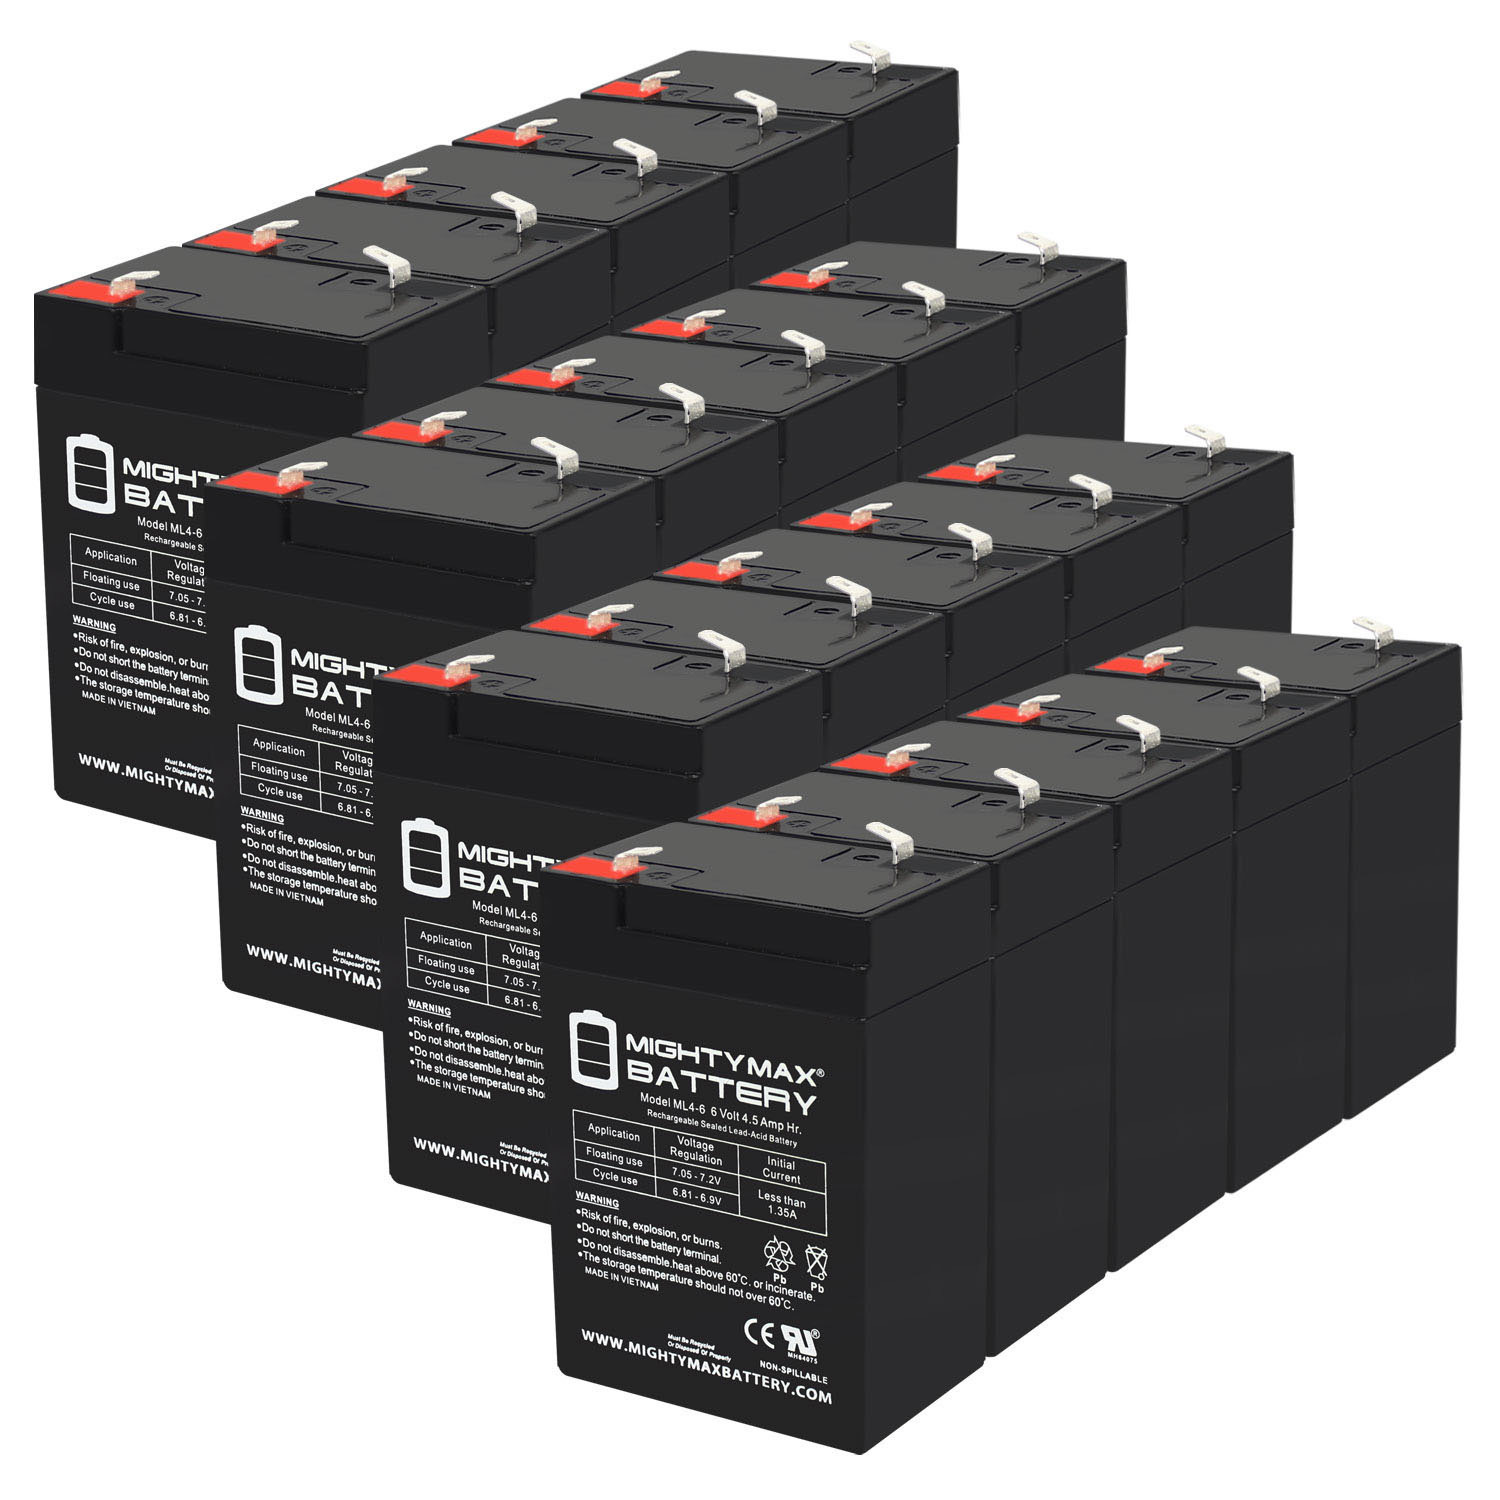 6V 4.5AH SLA Replacement Battery for Abbott Lab Life Care Pump 3D - 20 Pack